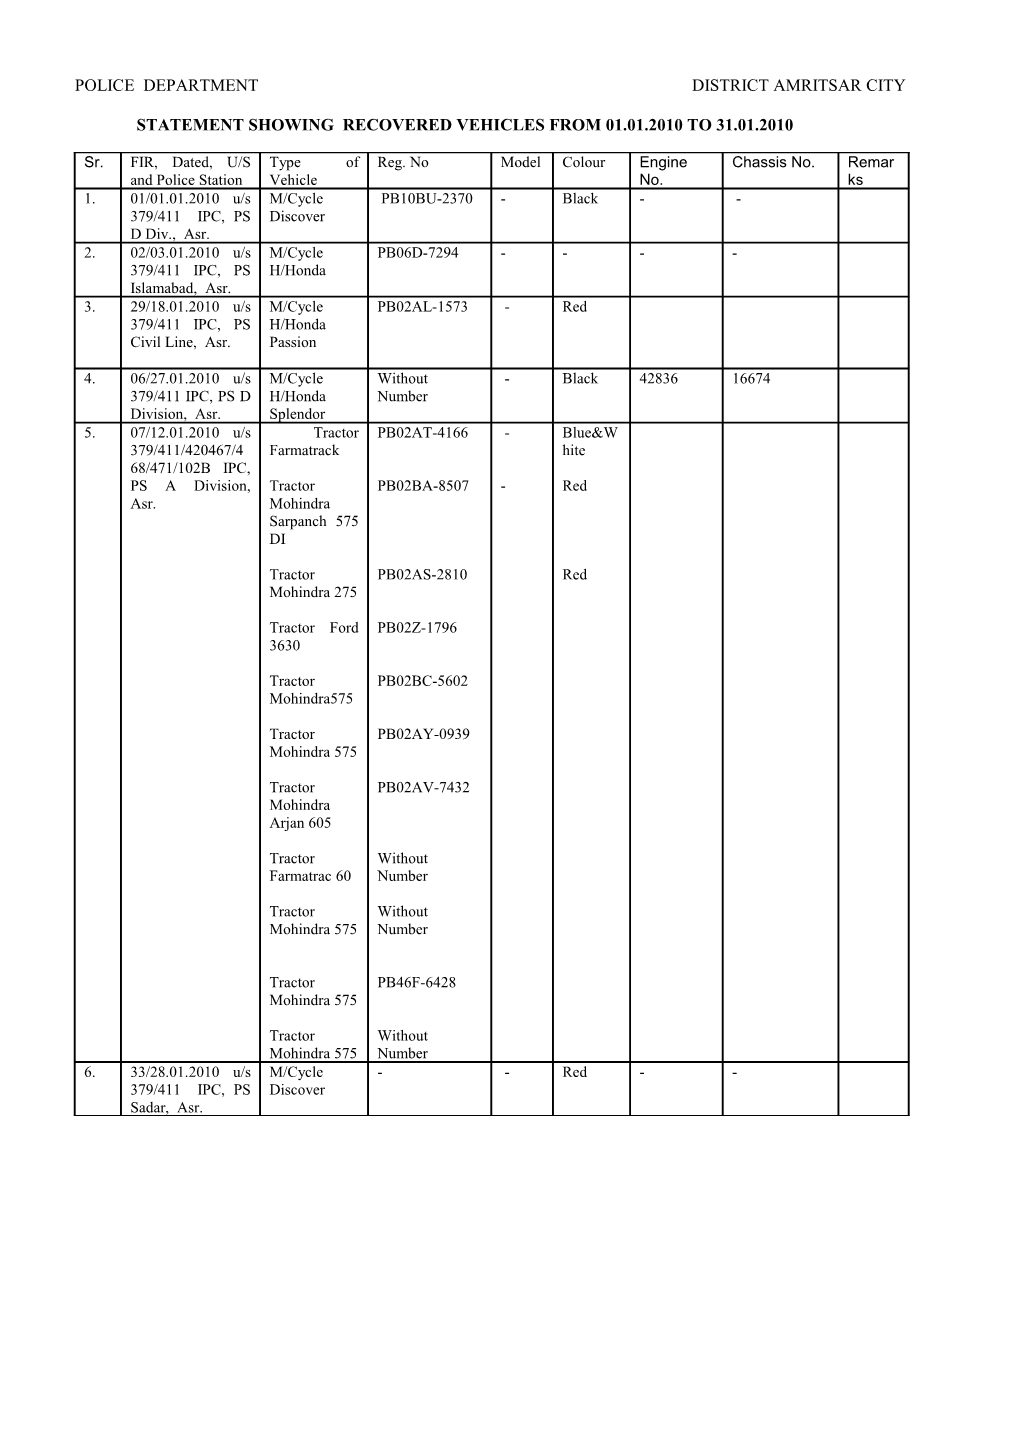 Statement Showing Recovered Vehicles from 01.01.2010 to 31.01.2010